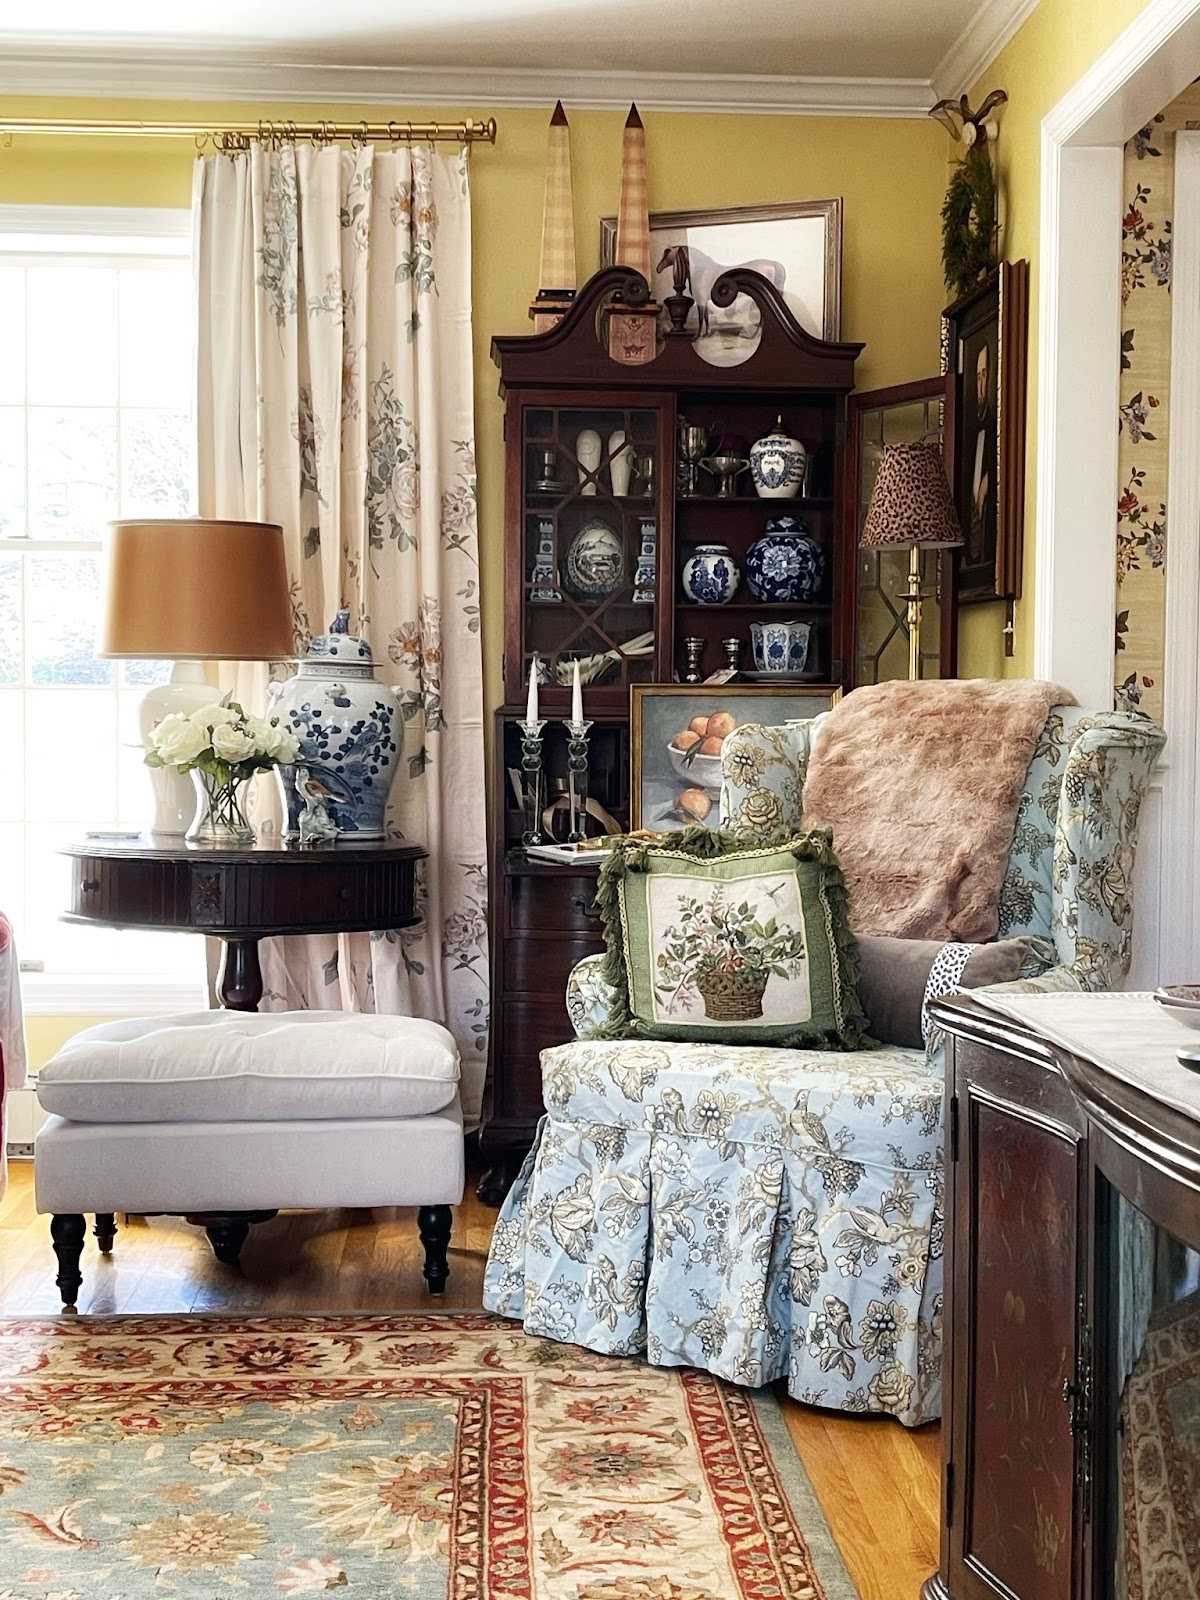 This cozy corner features a beautiful hutch showcasing an array of delicate blue and white porcelain urns and vases, a skirted armchair with a soft floral pattern, a plush ottoman, and small side table.